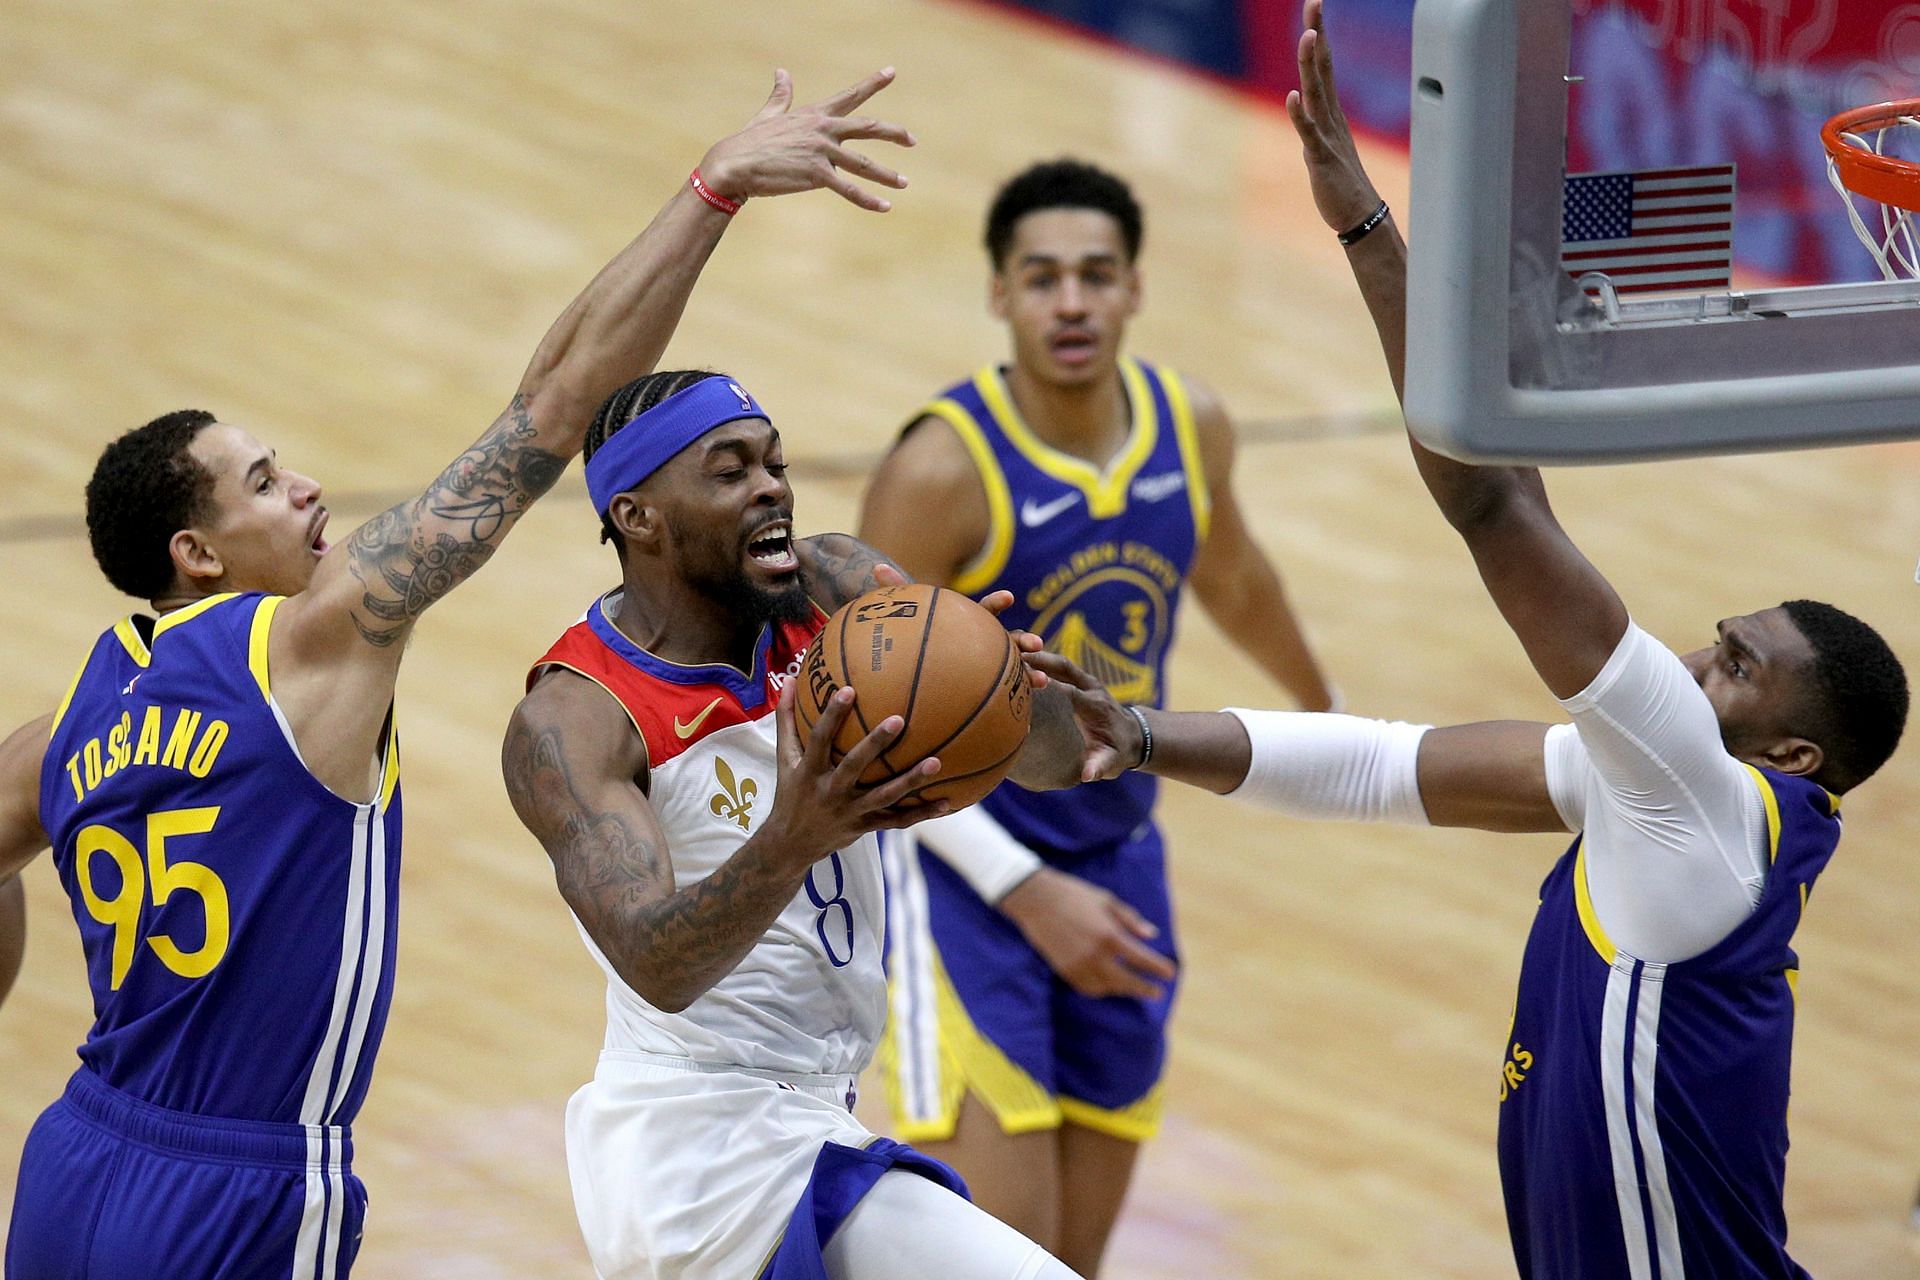 Naji Marshall of the New Orleans Pelicans drives against the Golden State Warriors.